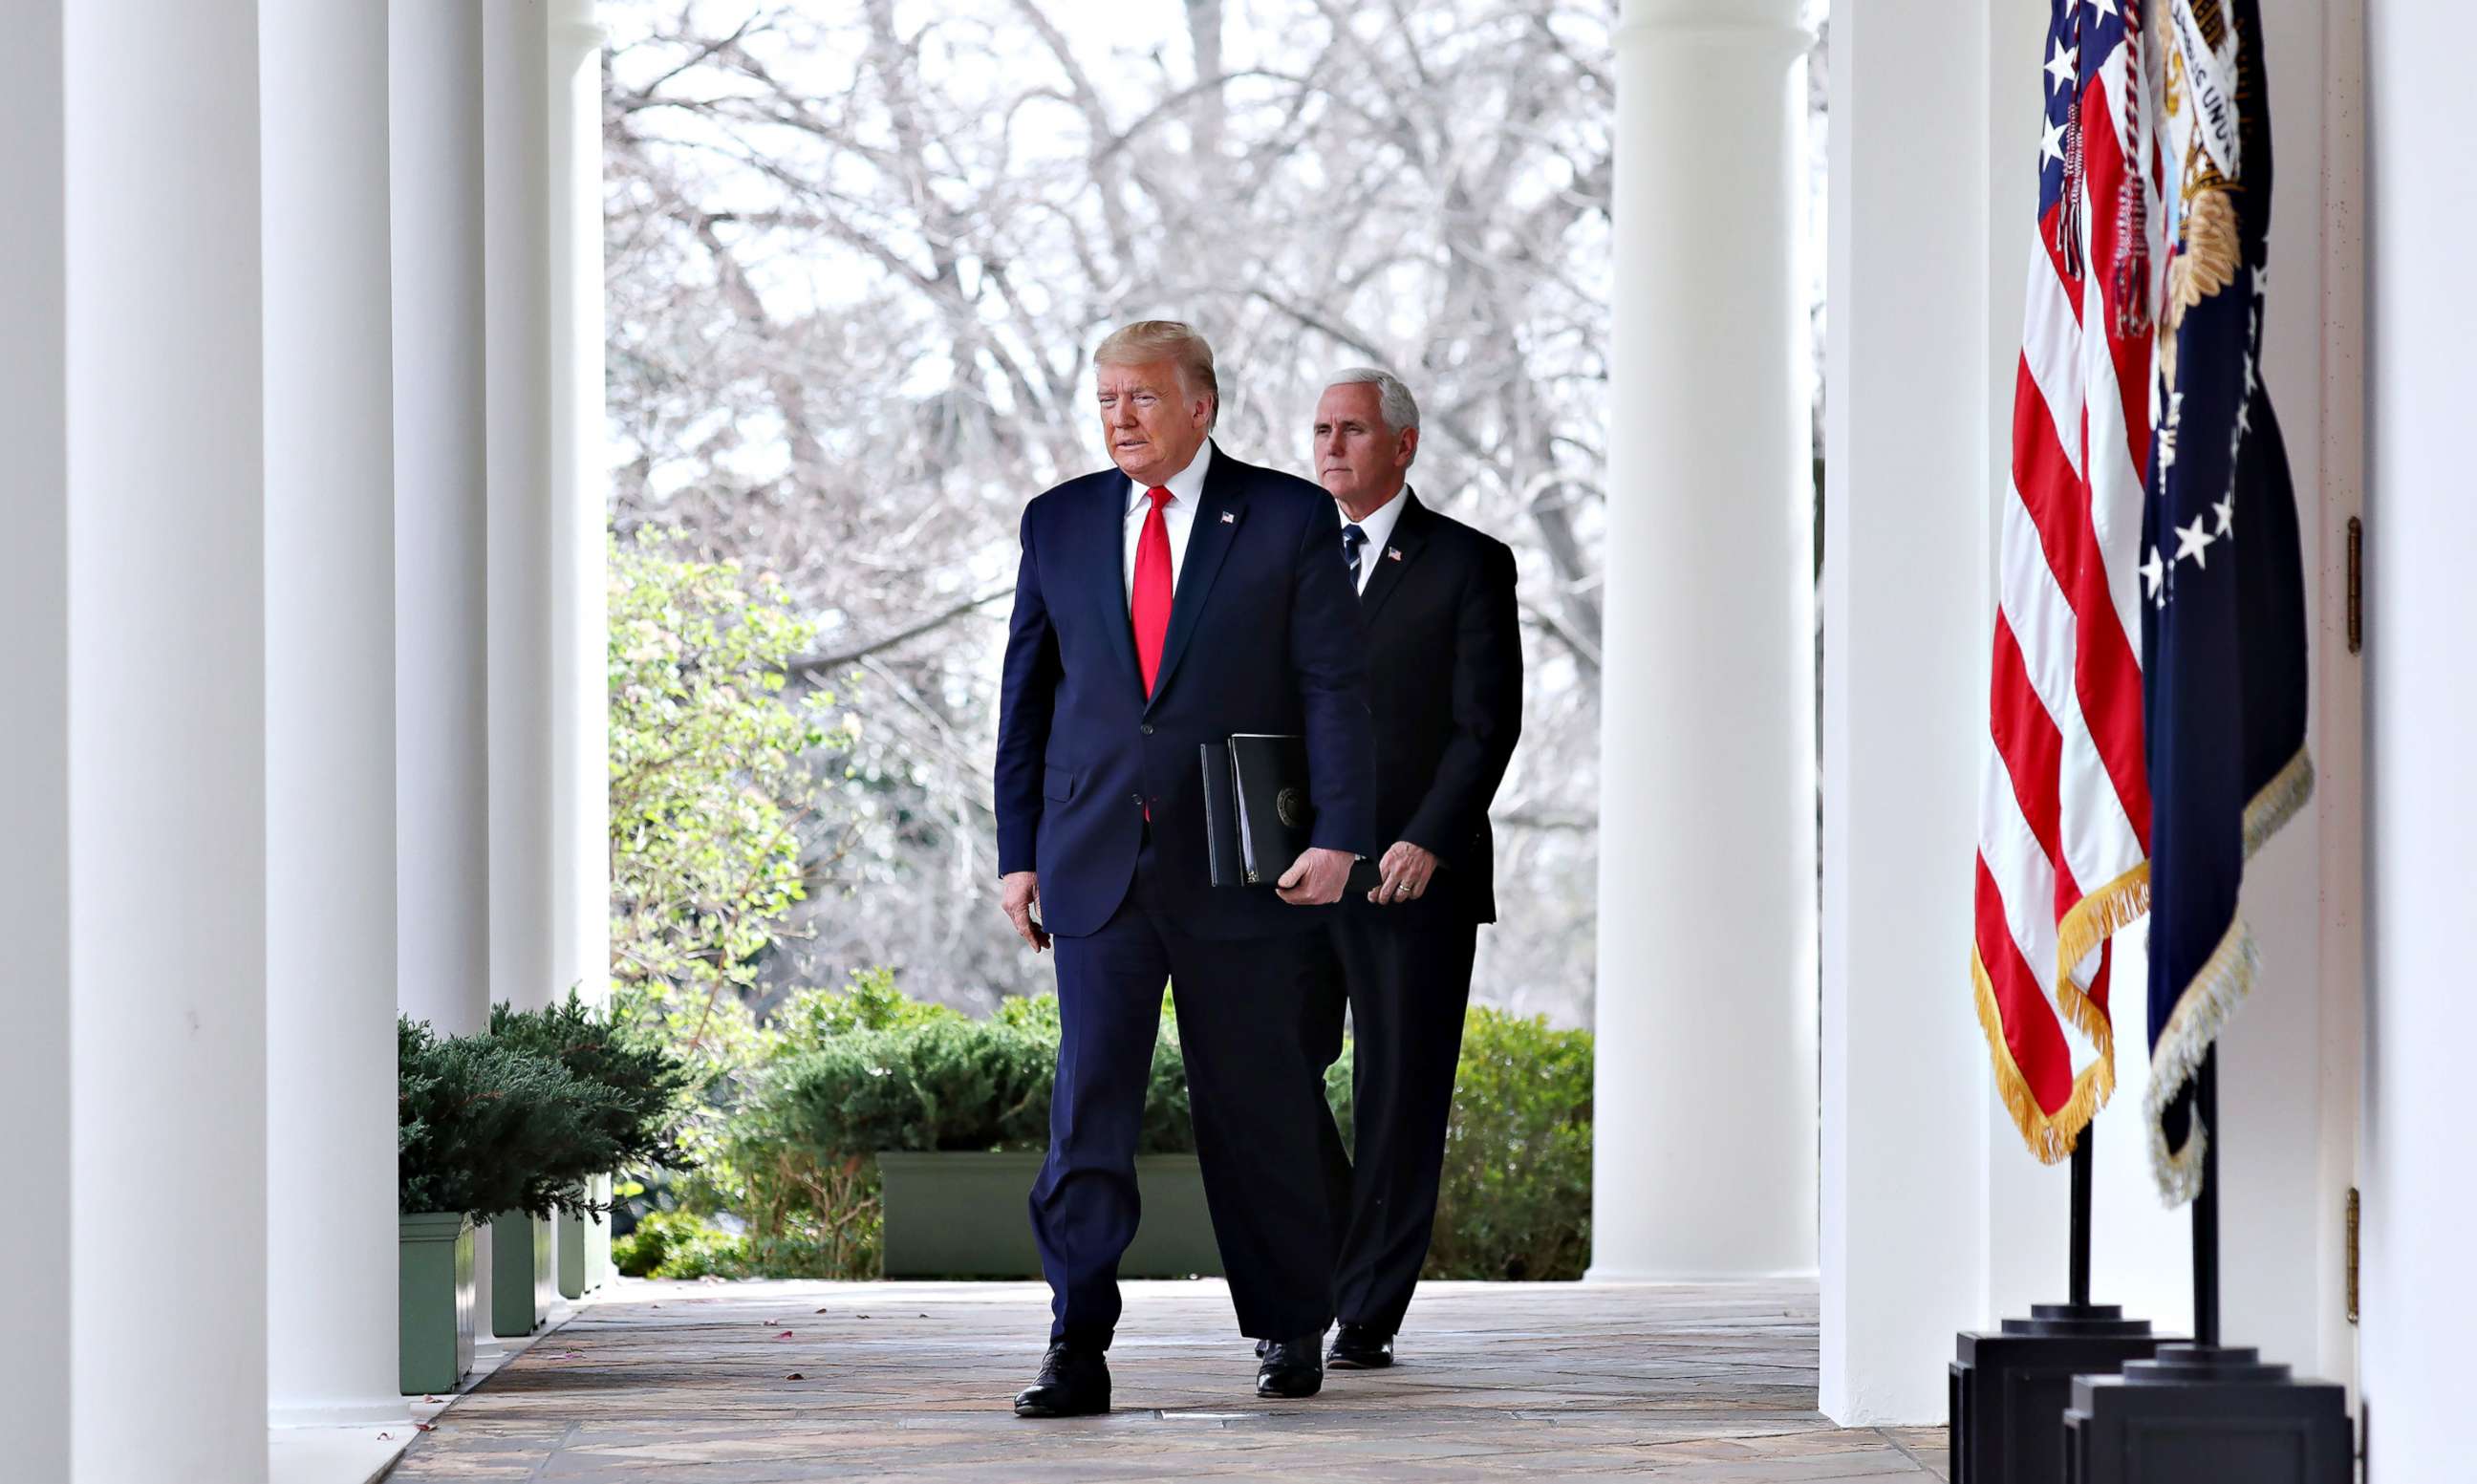 PHOTO: President Donald Trump arrives with Vice President Mike Pence to declare a national emergency due to the COVID-19 coronavirus pandemic, in the Rose Garden of the White House, in Washington, March 13, 2020.